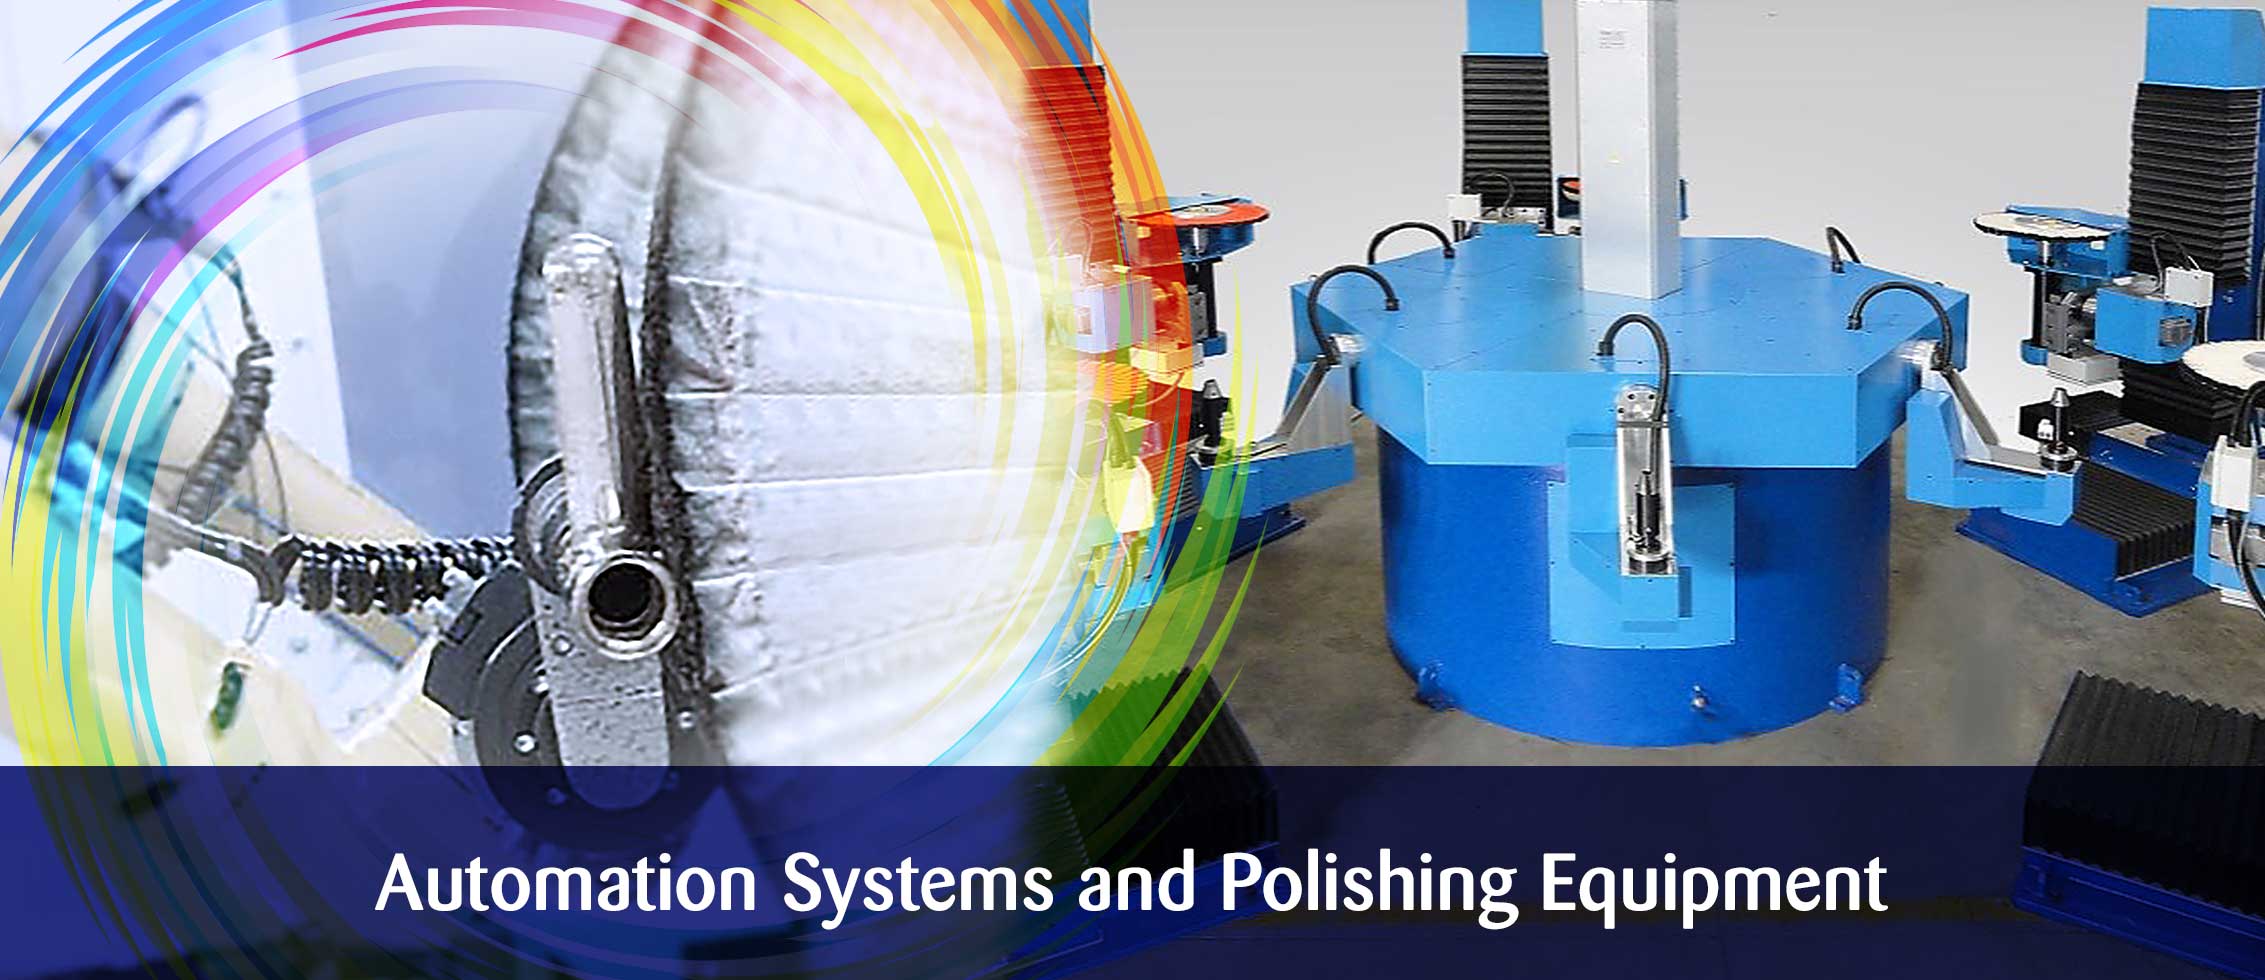 Automation Systems and Polishing Equipment